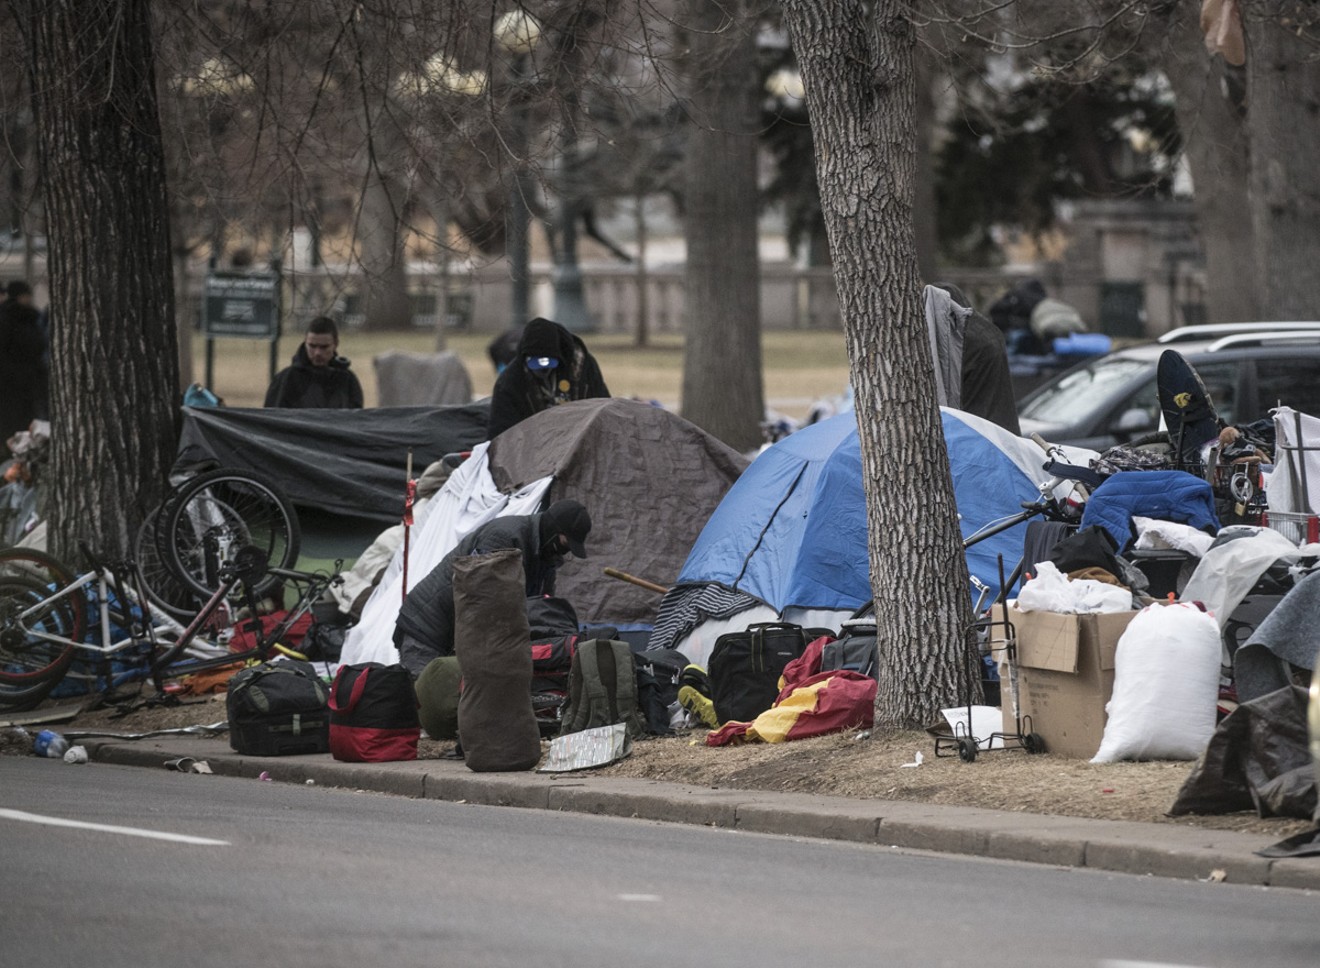 The homeless encampment by the Capitol.